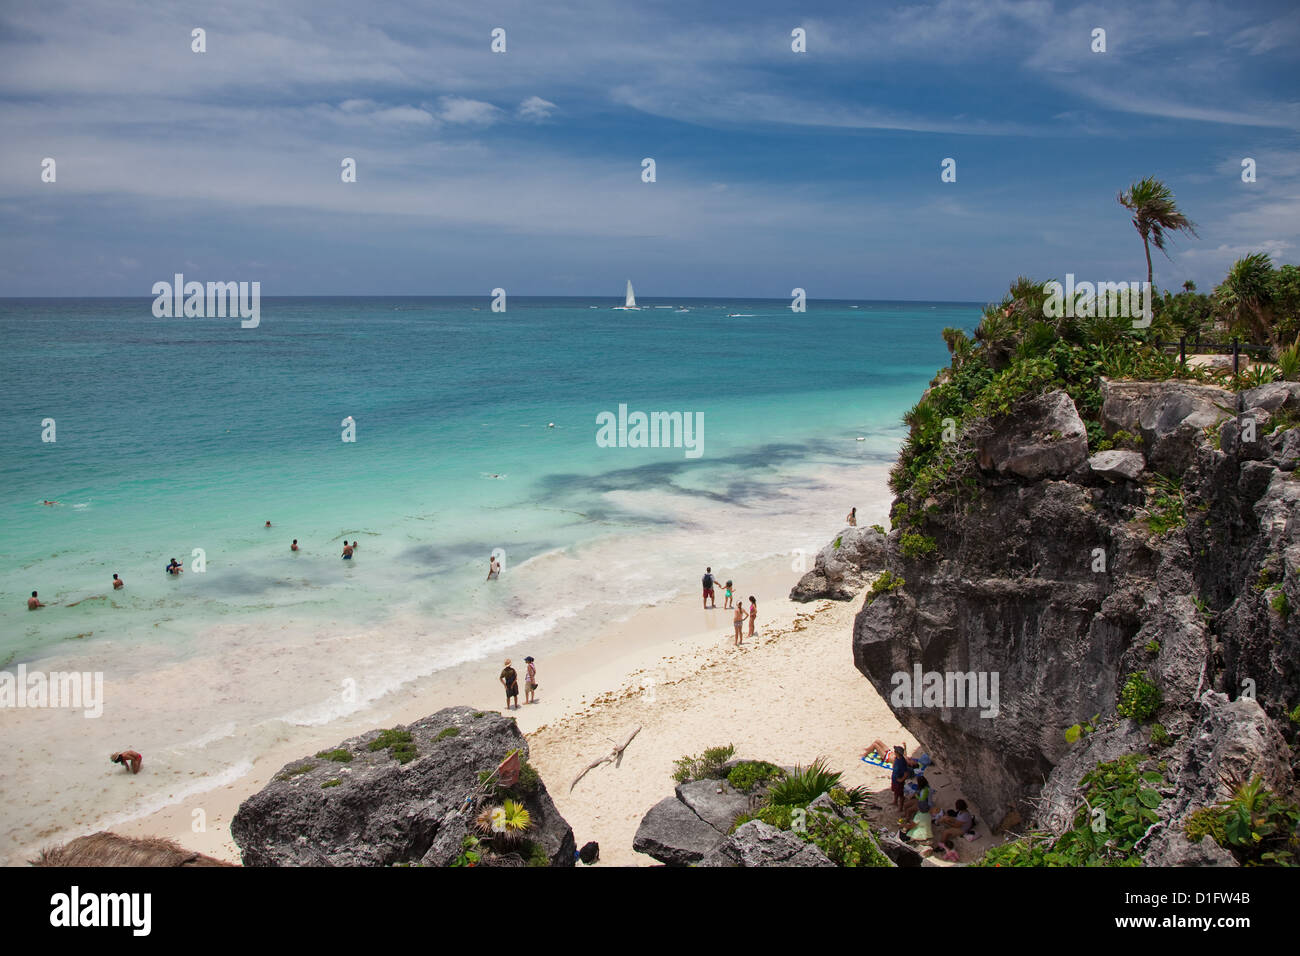 People swimming on the beautiful beach below the spectacular Mayan ruins at Tulum. Stock Photo